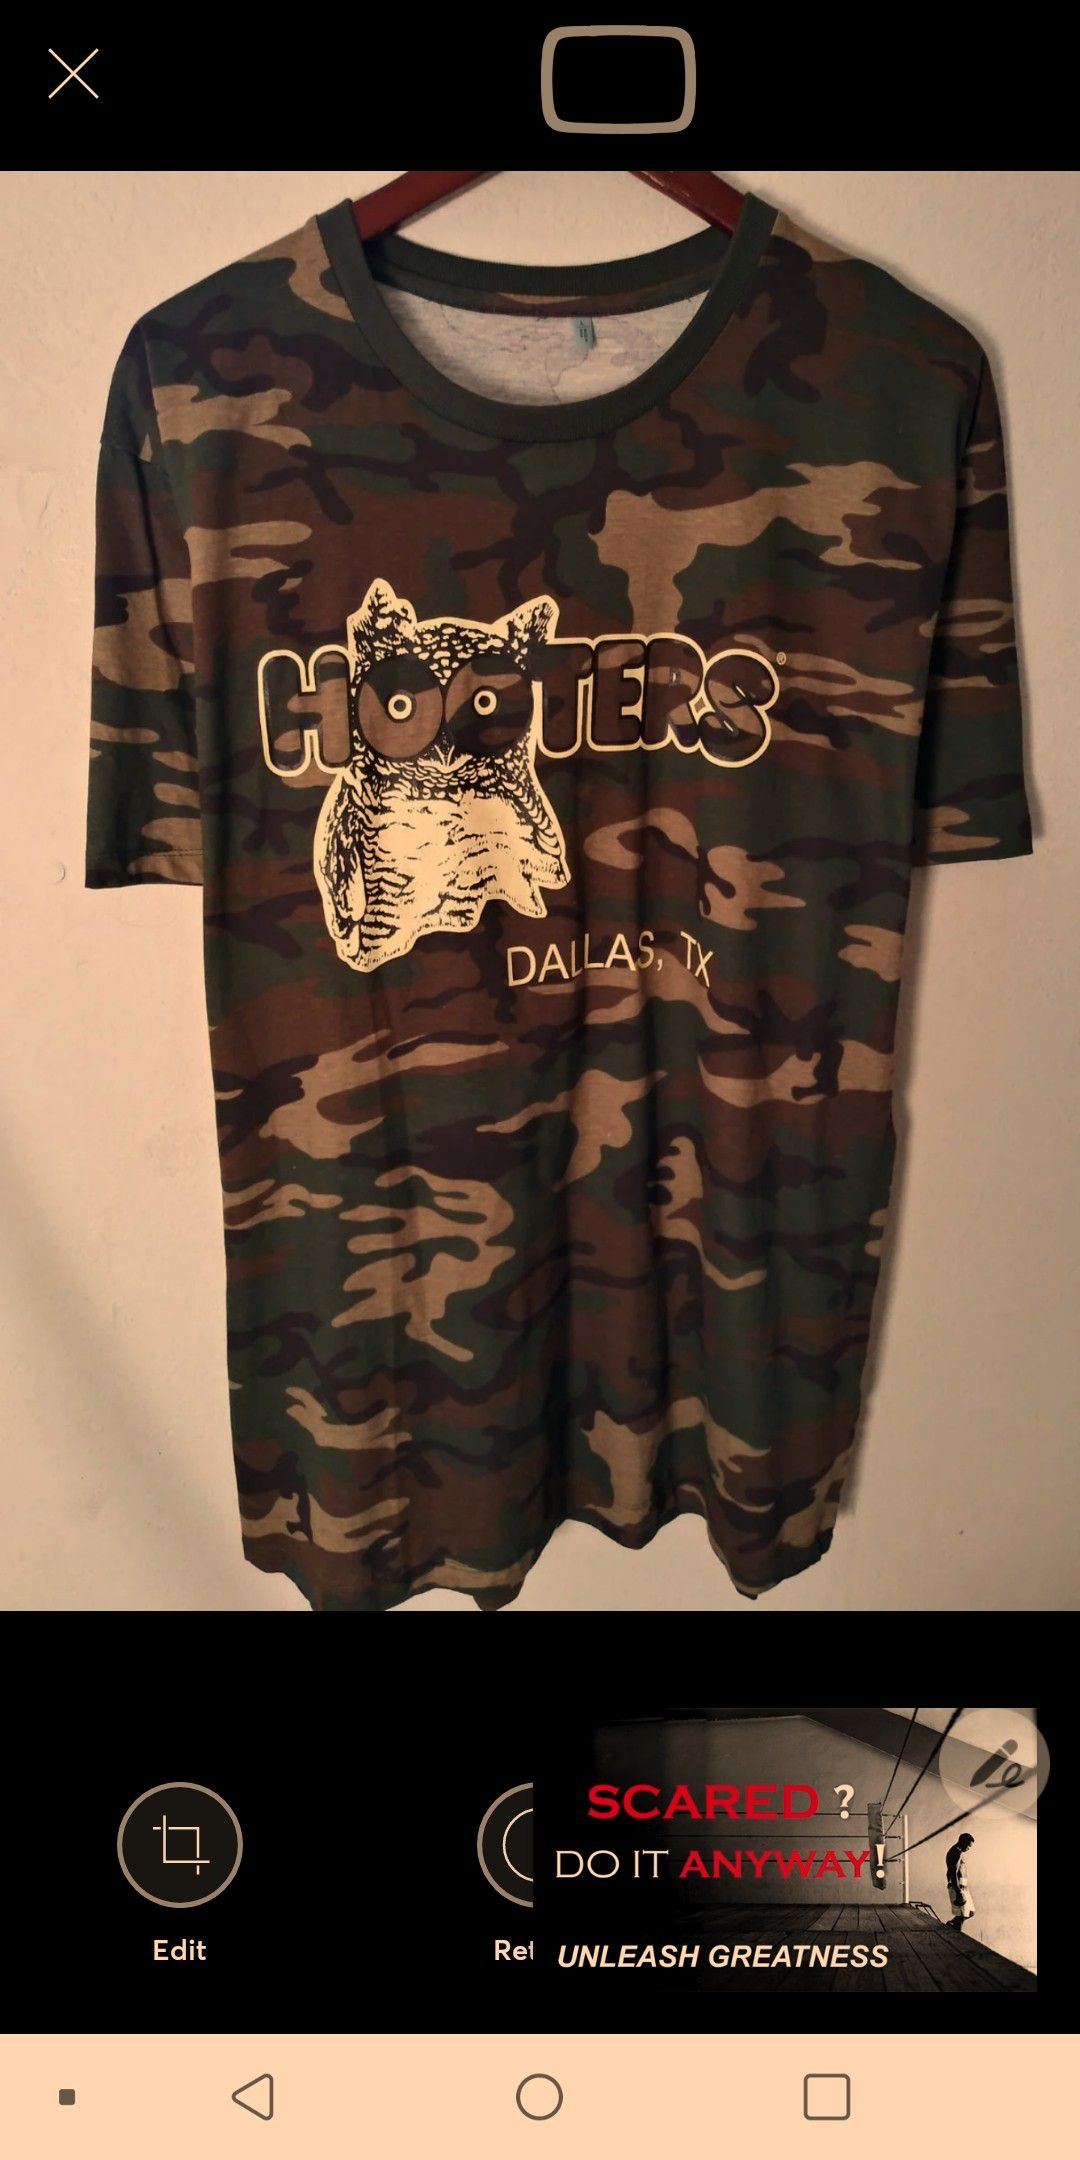 Hooters Mens Size Large Camo Shirt